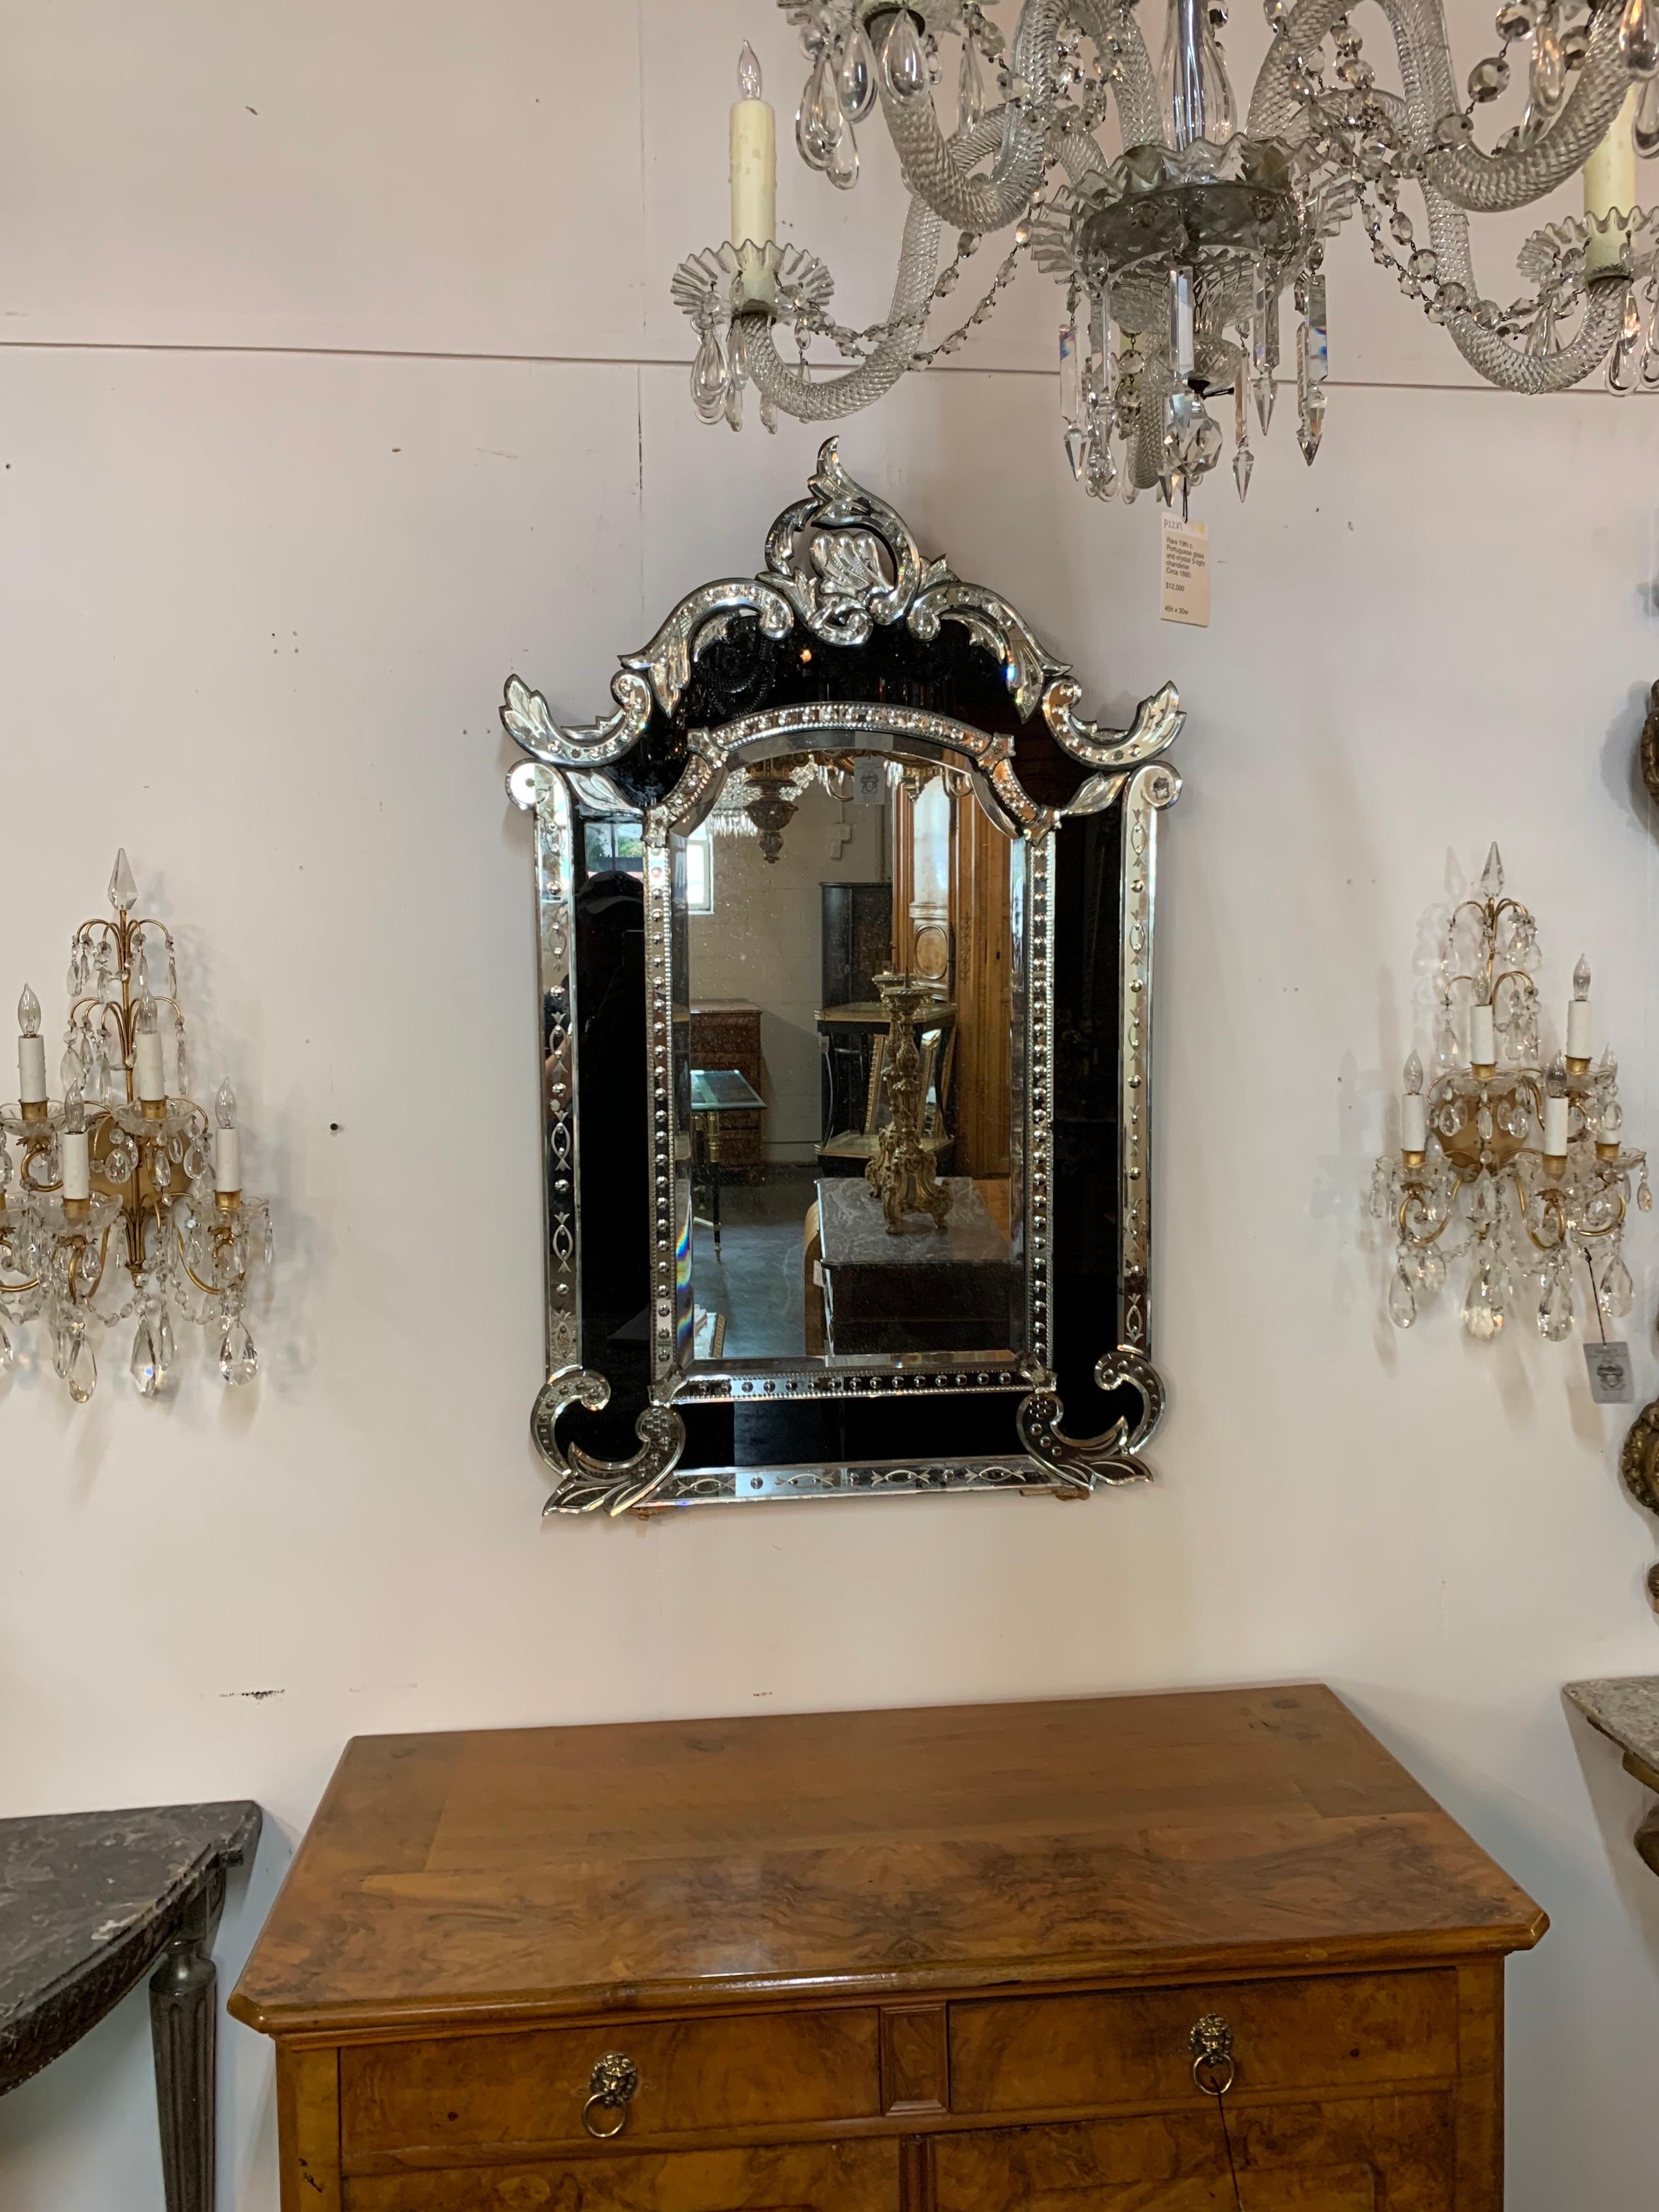 Very handsome 19th century Venetian etched mirror with black glass. Beautiful cut out shapes on the outer border of the mirror. And the black glass creates an interesting decorative impact! Stunning!